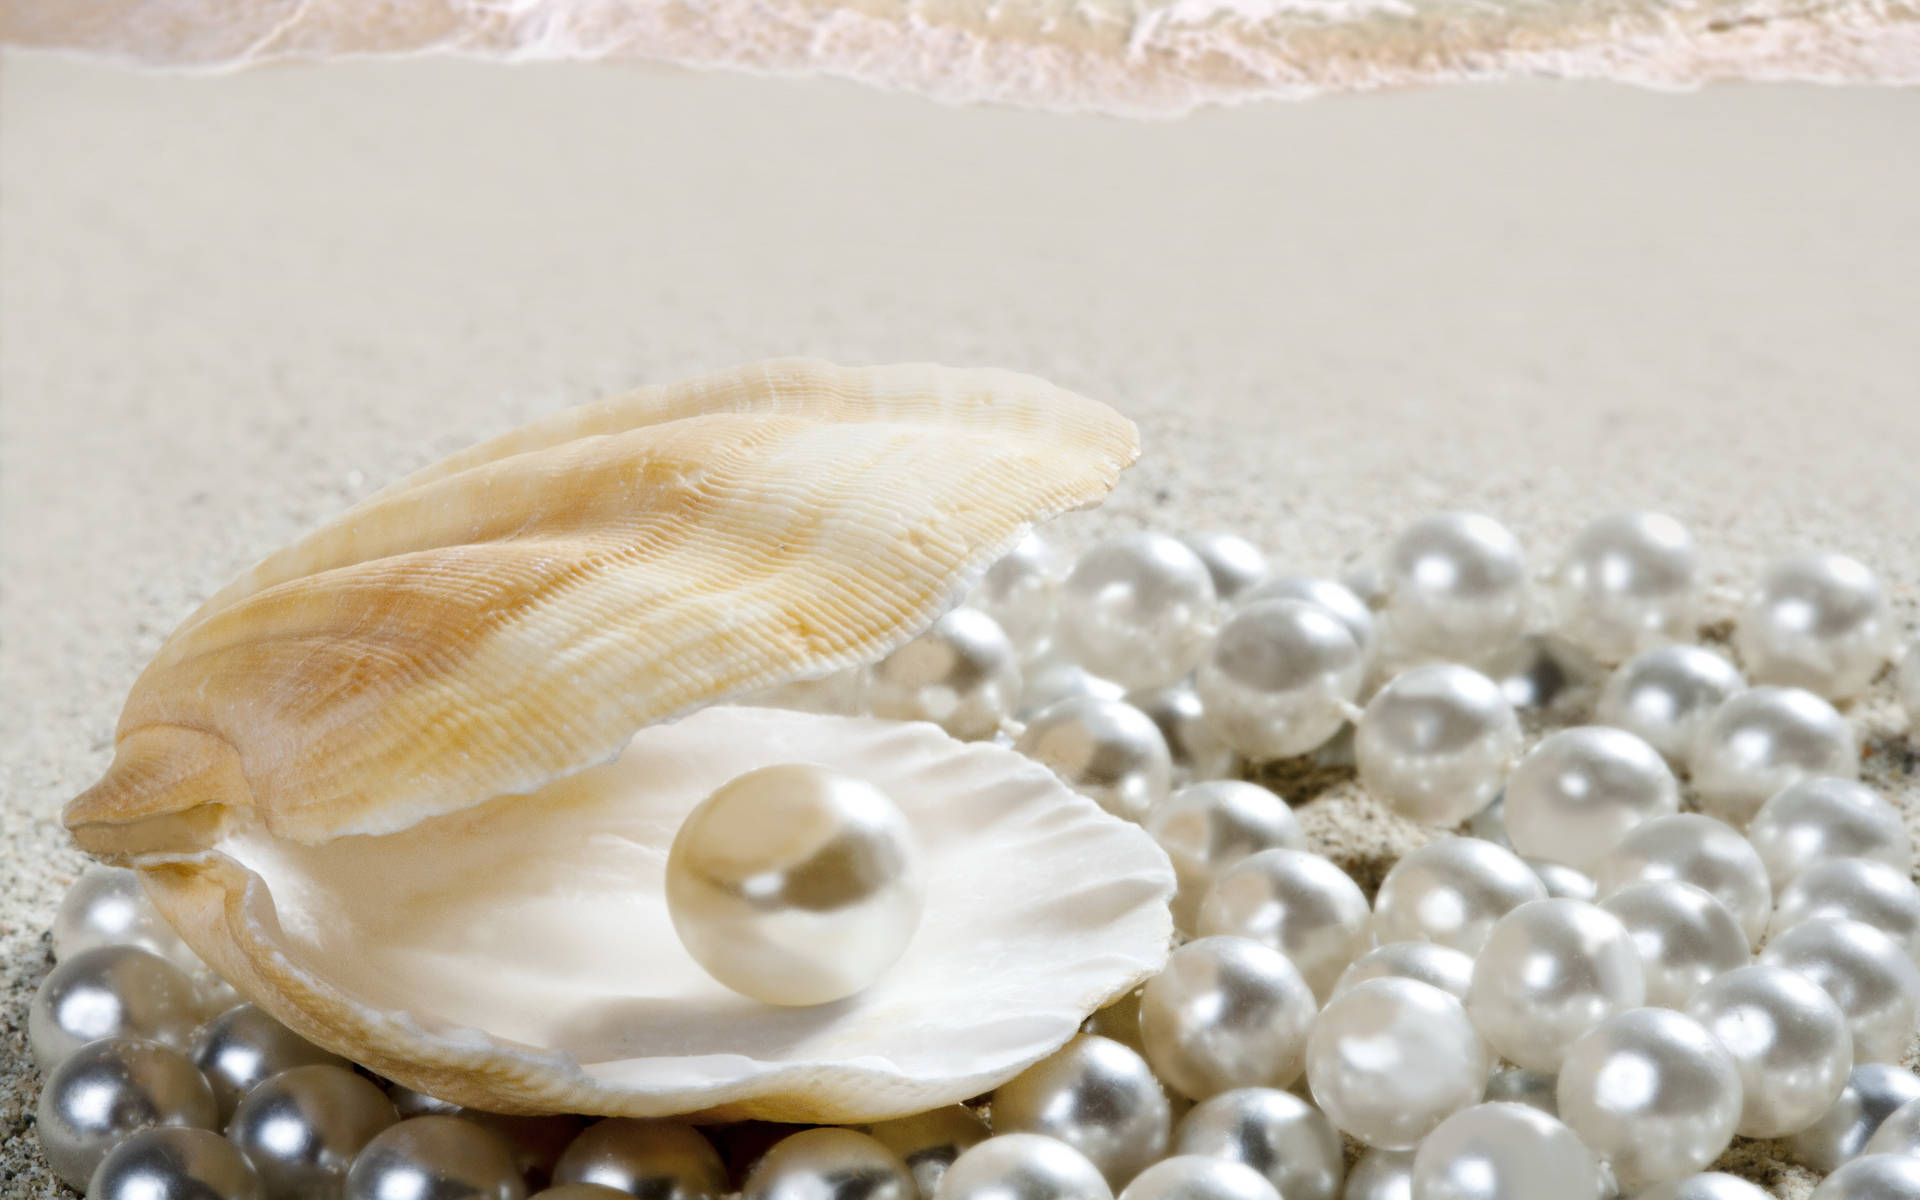 Caption: A Glistening Pearl in a radiant Seashell Wallpaper